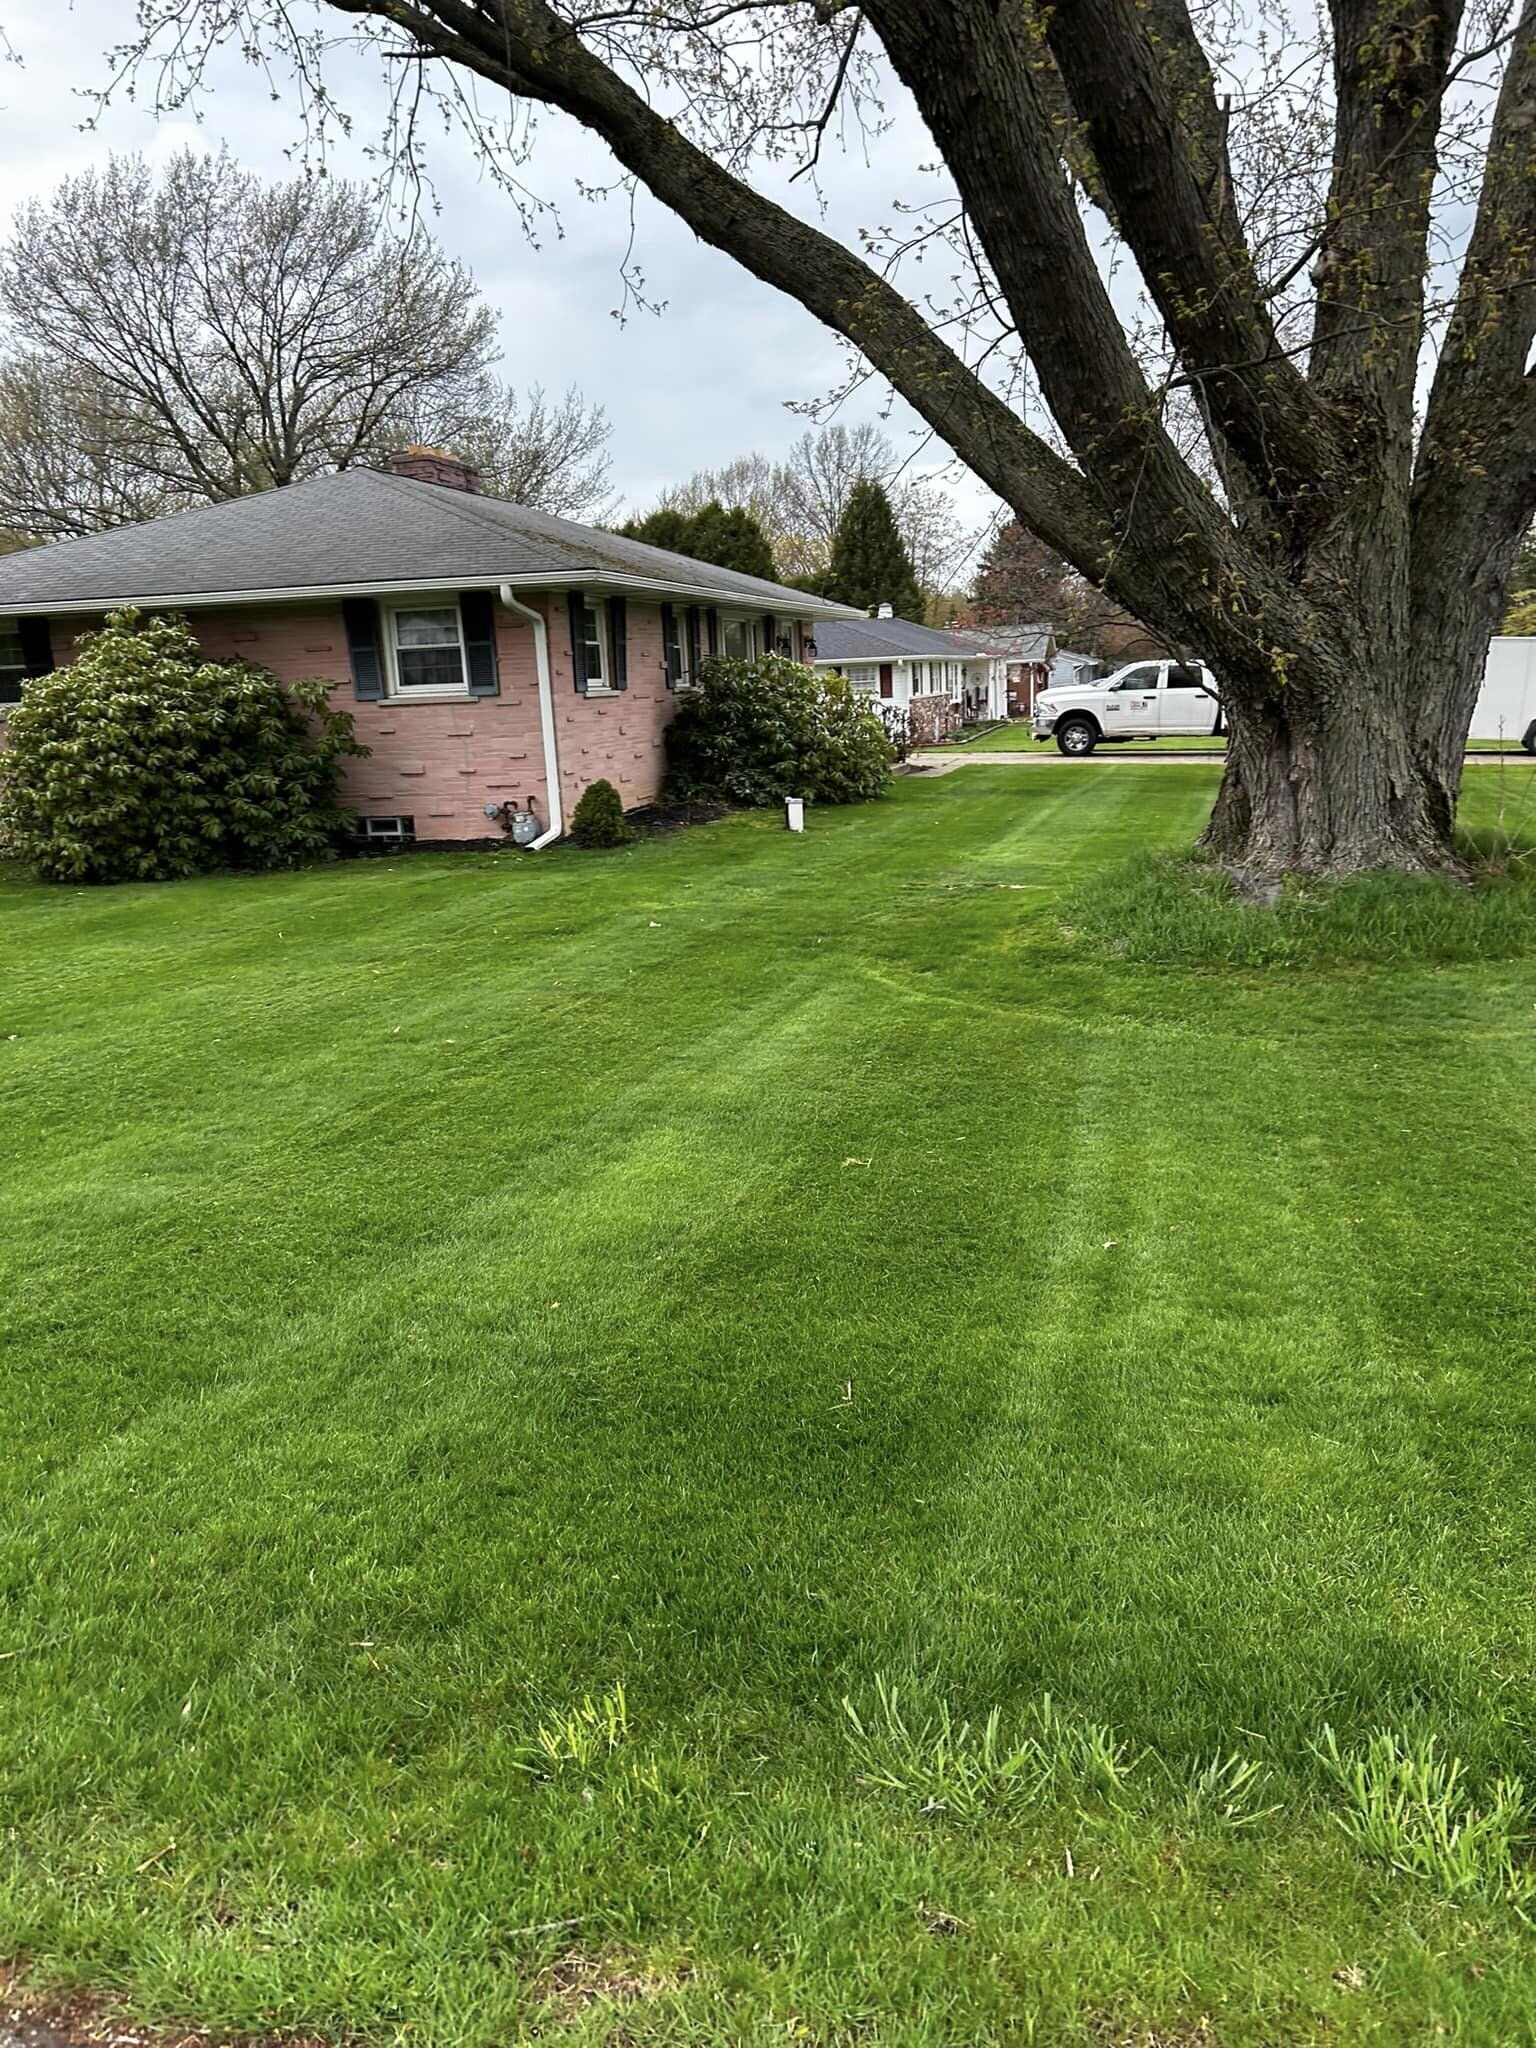 Lakefront Property Maintenance | Erie, PA | Lawn Care, Landscaping and Snow Management 7